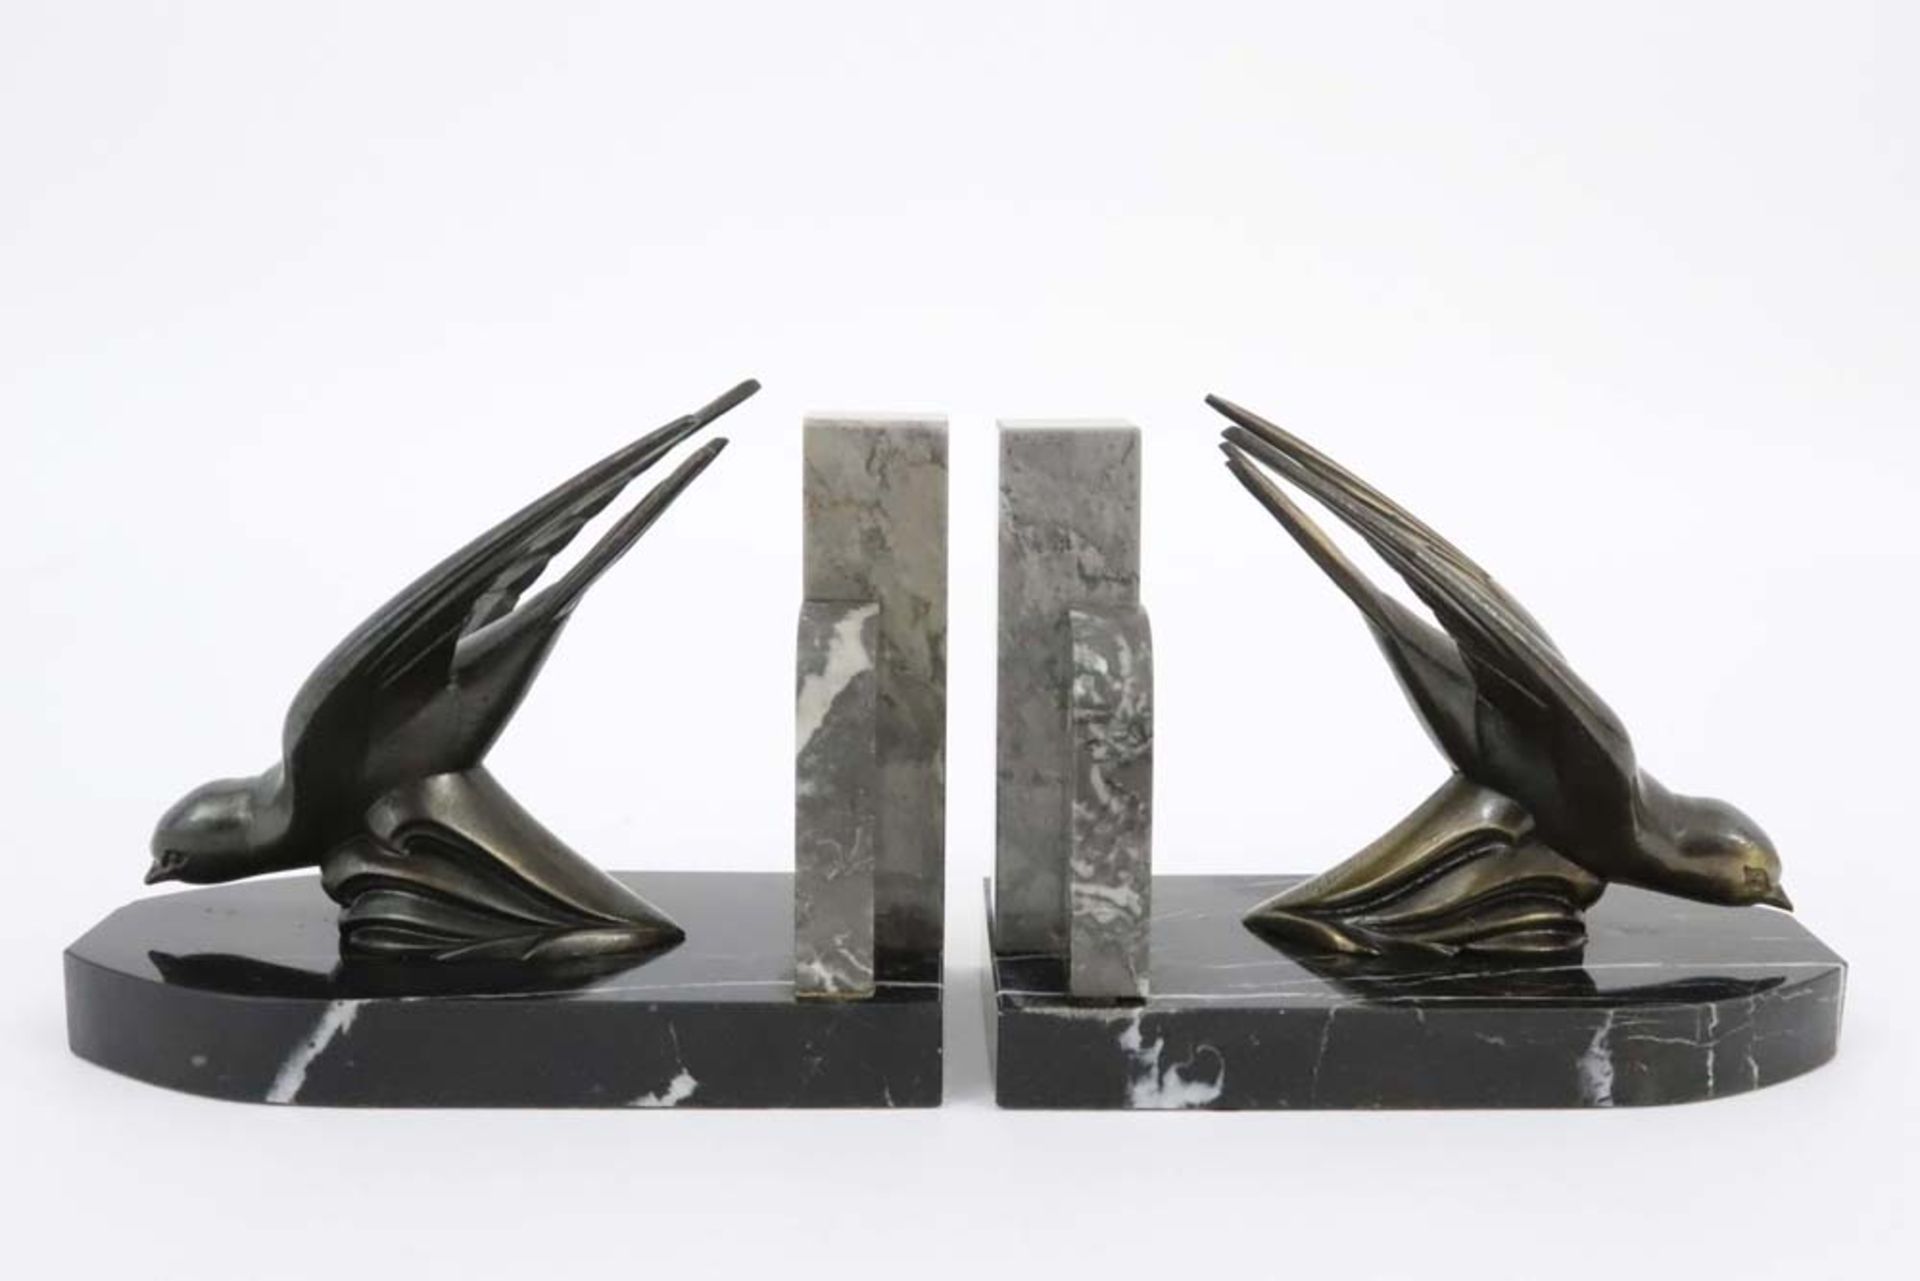 pair of Art Deco book-ends in marble, each with a stylised "swallow" sculpture || Paar Art Deco